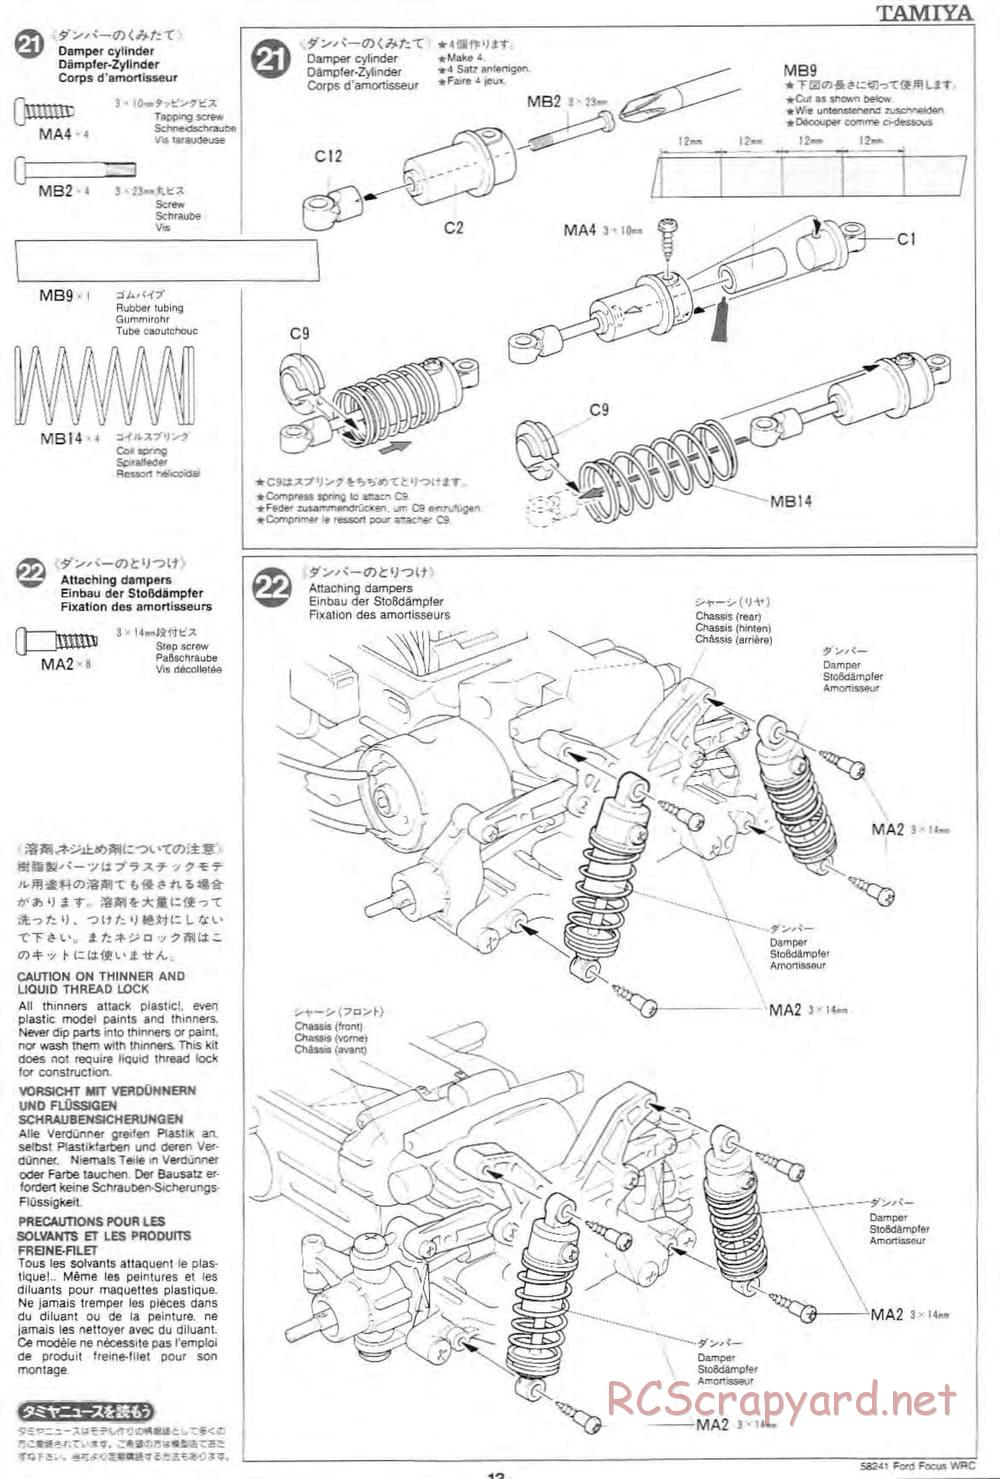 Tamiya - Ford Focus WRC - TL-01 Chassis - Manual - Page 13